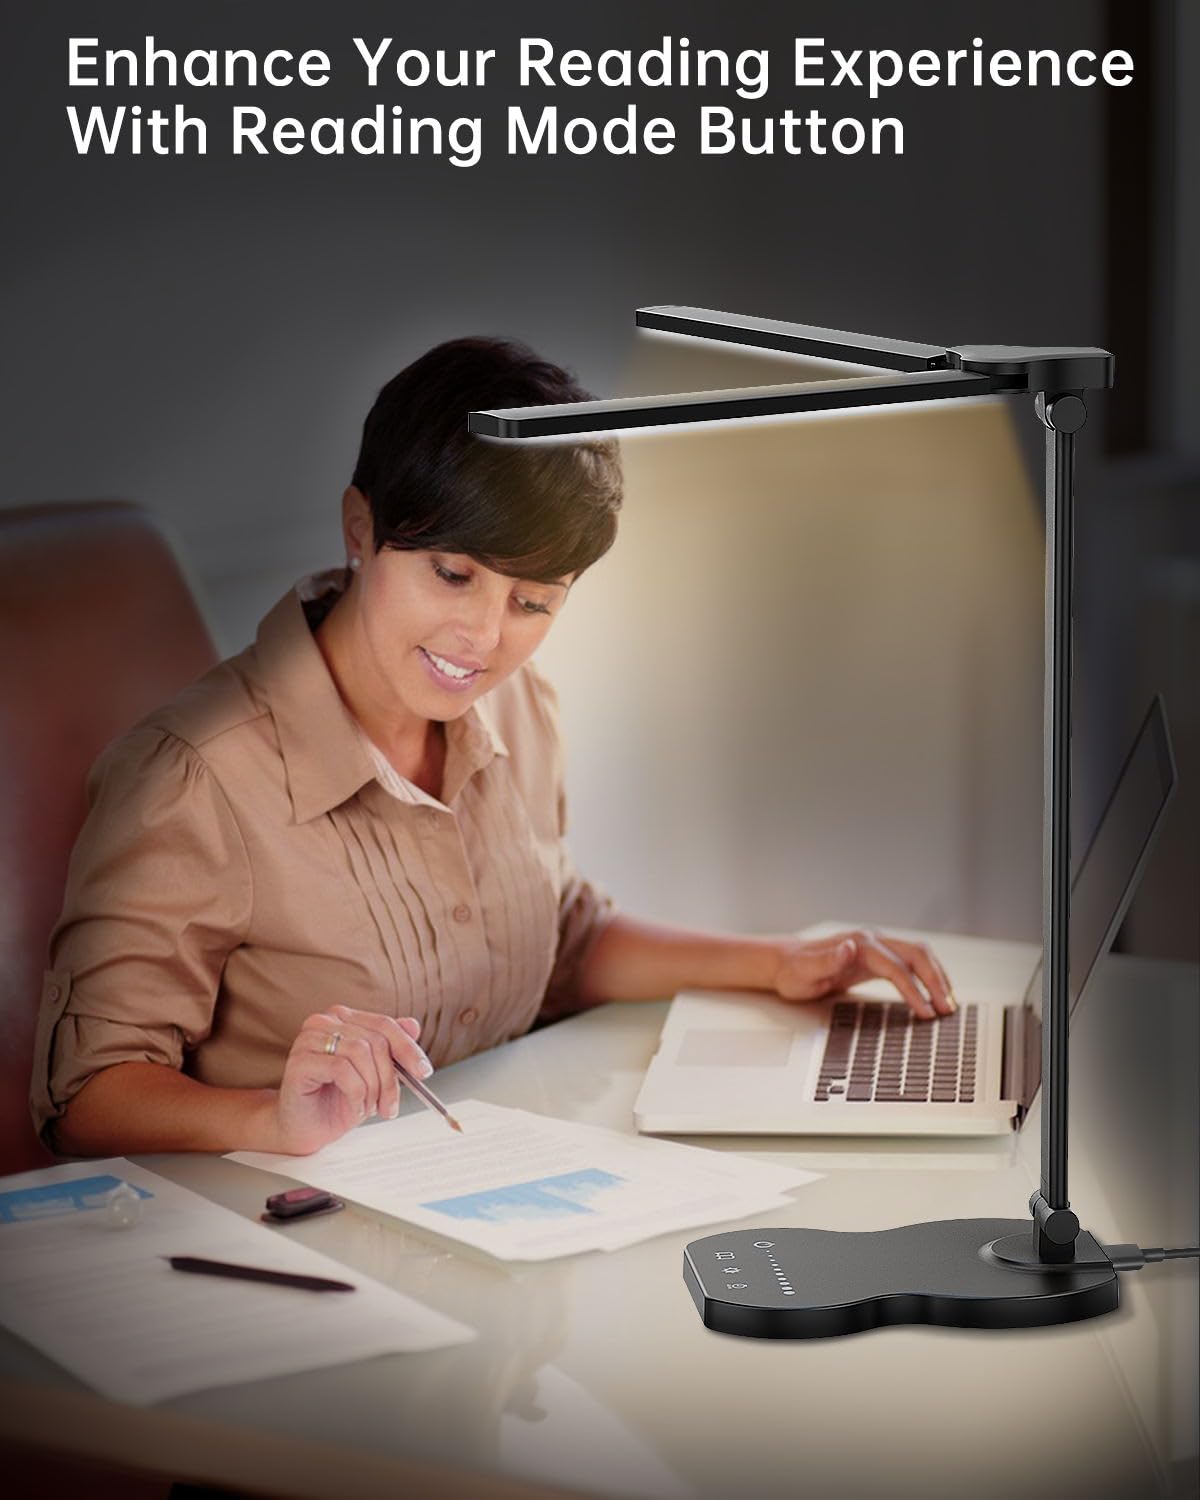 LED Double Head Desk Lamp for Home Office with Adjustable Swing Arms and Dimmable Touch Control LED Desk Light USB Power and Multi-Color Illumination for Home Office and Study